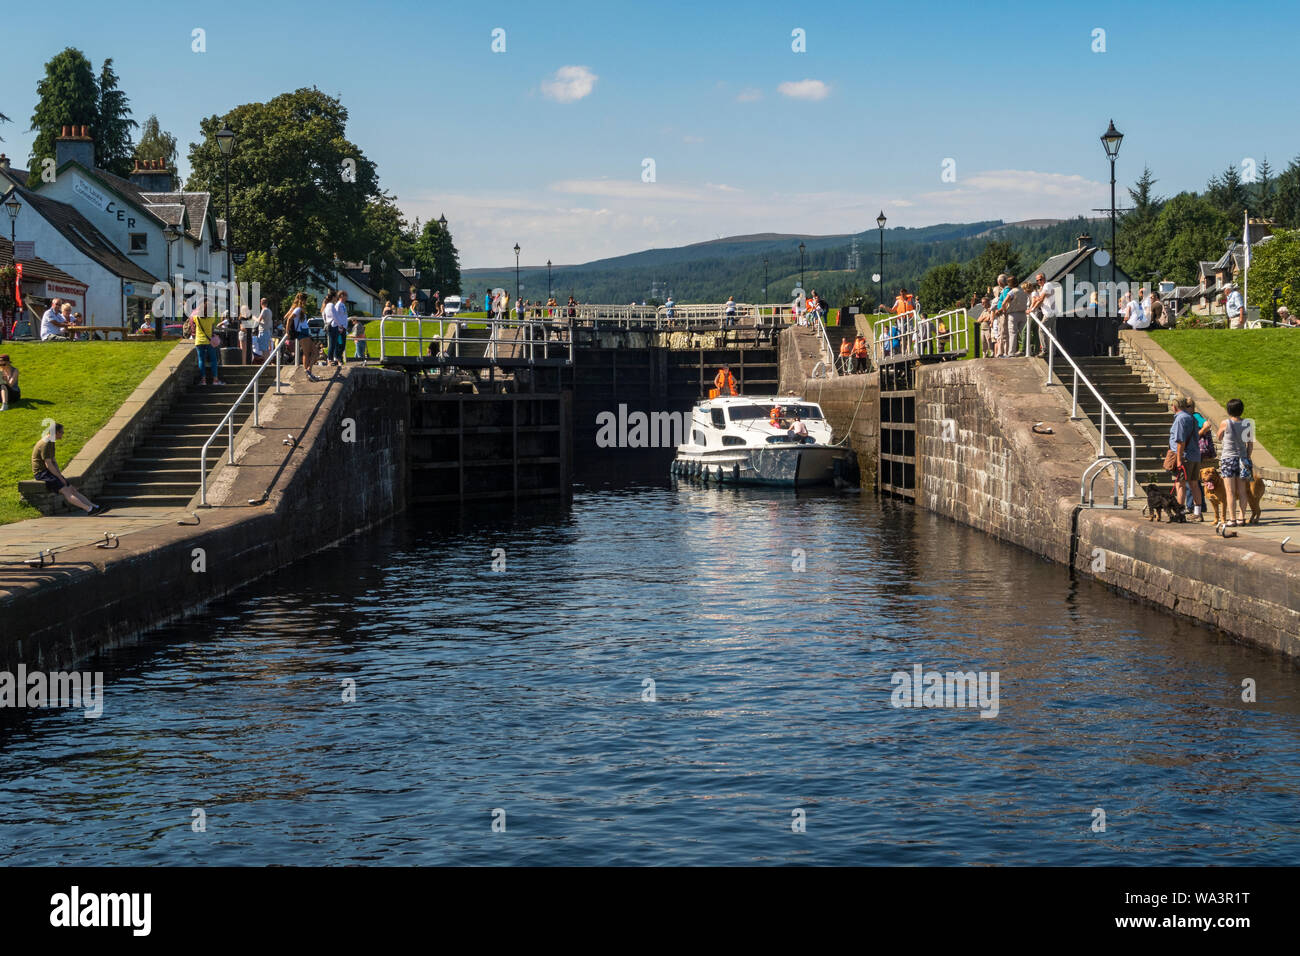 A boat makes its way through locks on the Caledonian Canal at Fort Augustus near Loch Ness in Scotland on a sunny day, watched by tourists. Stock Photo